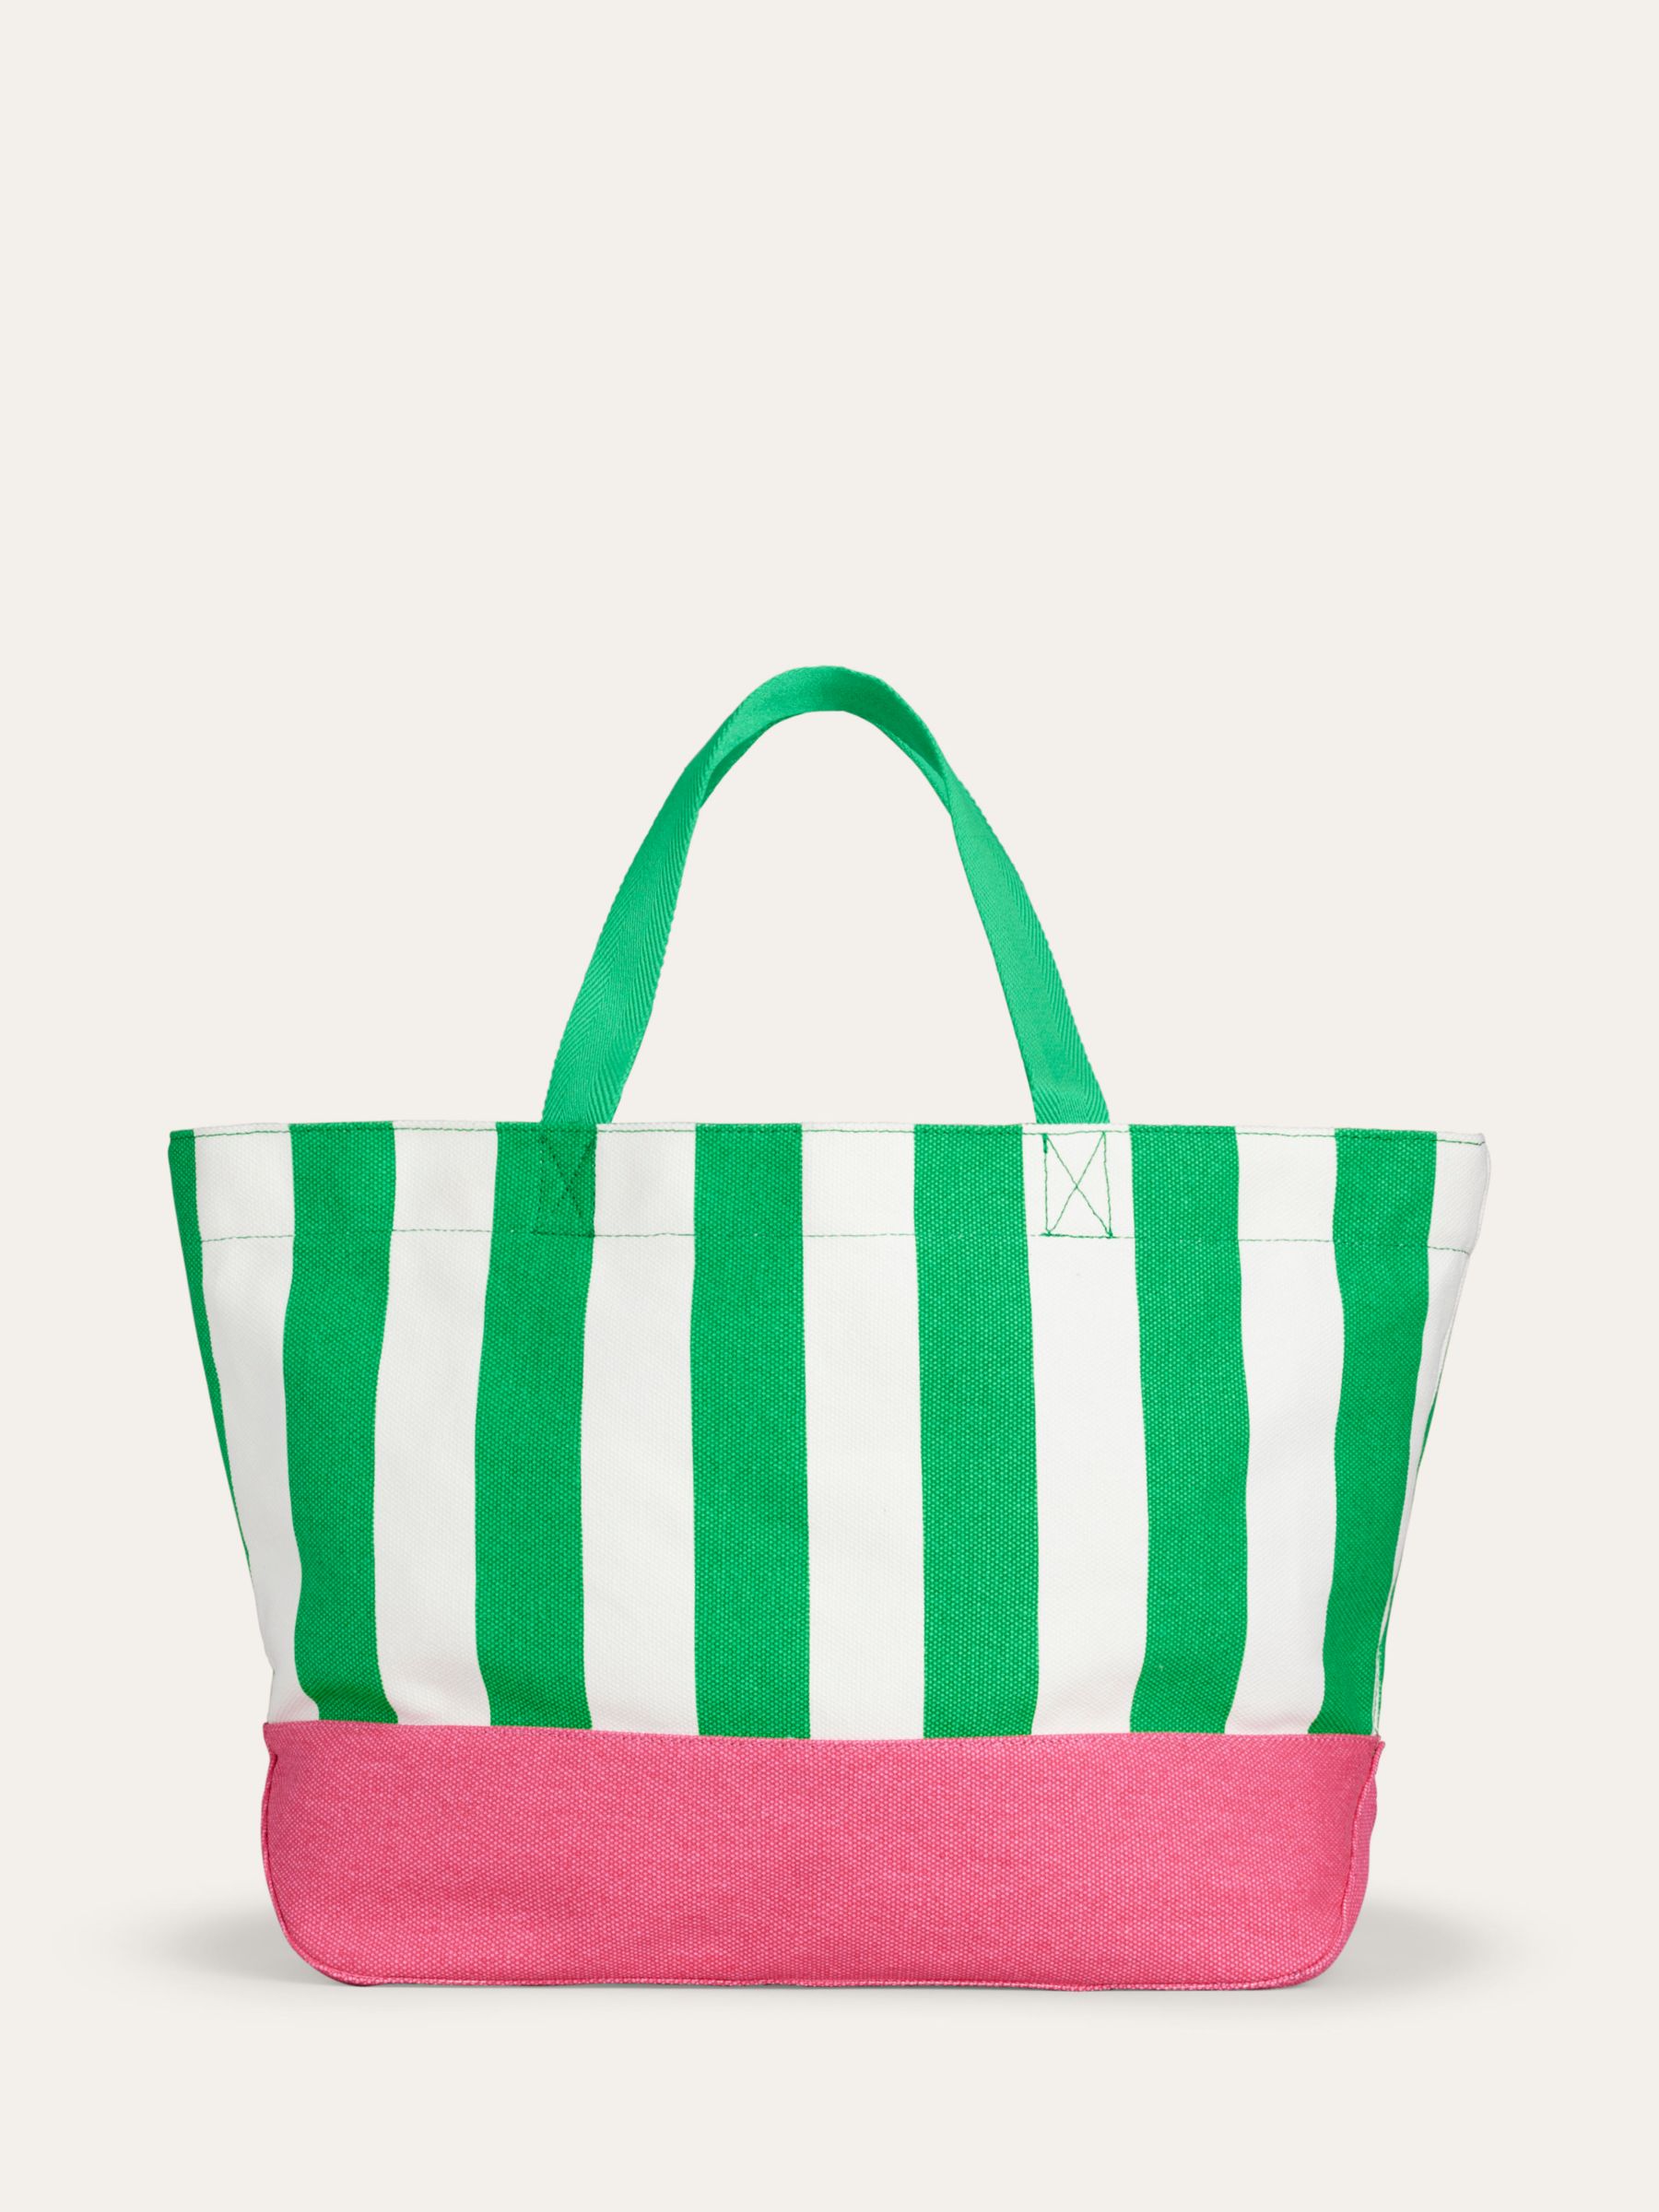 Boden Relaxed Canvas Stripe Tote Bag, Green/White/Pink, One Size